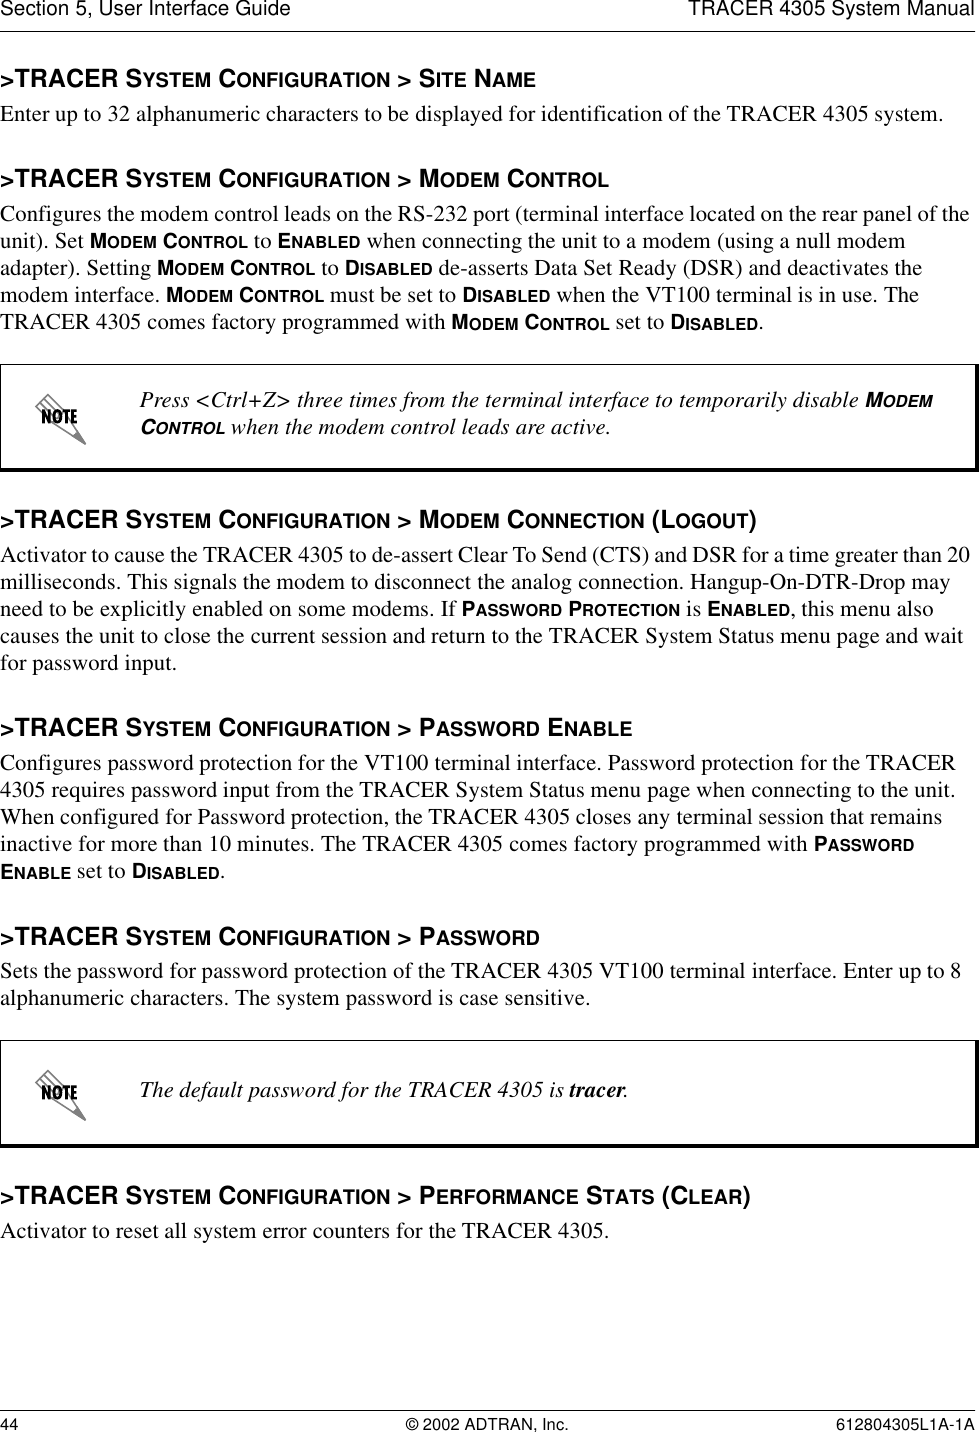 Section 5, User Interface Guide TRACER 4305 System Manual44 © 2002 ADTRAN, Inc. 612804305L1A-1A&gt;TRACER SYSTEM CONFIGURATION &gt; SITE NAMEEnter up to 32 alphanumeric characters to be displayed for identification of the TRACER 4305 system. &gt;TRACER SYSTEM CONFIGURATION &gt; MODEM CONTROLConfigures the modem control leads on the RS-232 port (terminal interface located on the rear panel of the unit). Set MODEM CONTROL to ENABLED when connecting the unit to a modem (using a null modem adapter). Setting MODEM CONTROL to DISABLED de-asserts Data Set Ready (DSR) and deactivates the modem interface. MODEM CONTROL must be set to DISABLED when the VT100 terminal is in use. The TRACER 4305 comes factory programmed with MODEM CONTROL set to DISABLED.&gt;TRACER SYSTEM CONFIGURATION &gt; MODEM CONNECTION (LOGOUT)Activator to cause the TRACER 4305 to de-assert Clear To Send (CTS) and DSR for a time greater than 20 milliseconds. This signals the modem to disconnect the analog connection. Hangup-On-DTR-Drop may need to be explicitly enabled on some modems. If PASSWORD PROTECTION is ENABLED, this menu also causes the unit to close the current session and return to the TRACER System Status menu page and wait for password input.&gt;TRACER SYSTEM CONFIGURATION &gt; PASSWORD ENABLEConfigures password protection for the VT100 terminal interface. Password protection for the TRACER 4305 requires password input from the TRACER System Status menu page when connecting to the unit. When configured for Password protection, the TRACER 4305 closes any terminal session that remains inactive for more than 10 minutes. The TRACER 4305 comes factory programmed with PASSWORD ENABLE set to DISABLED. &gt;TRACER SYSTEM CONFIGURATION &gt; PASSWORDSets the password for password protection of the TRACER 4305 VT100 terminal interface. Enter up to 8 alphanumeric characters. The system password is case sensitive.&gt;TRACER SYSTEM CONFIGURATION &gt; PERFORMANCE STATS (CLEAR)Activator to reset all system error counters for the TRACER 4305.Press &lt;Ctrl+Z&gt; three times from the terminal interface to temporarily disable MODEM CONTROL when the modem control leads are active.The default password for the TRACER 4305 is tracer.